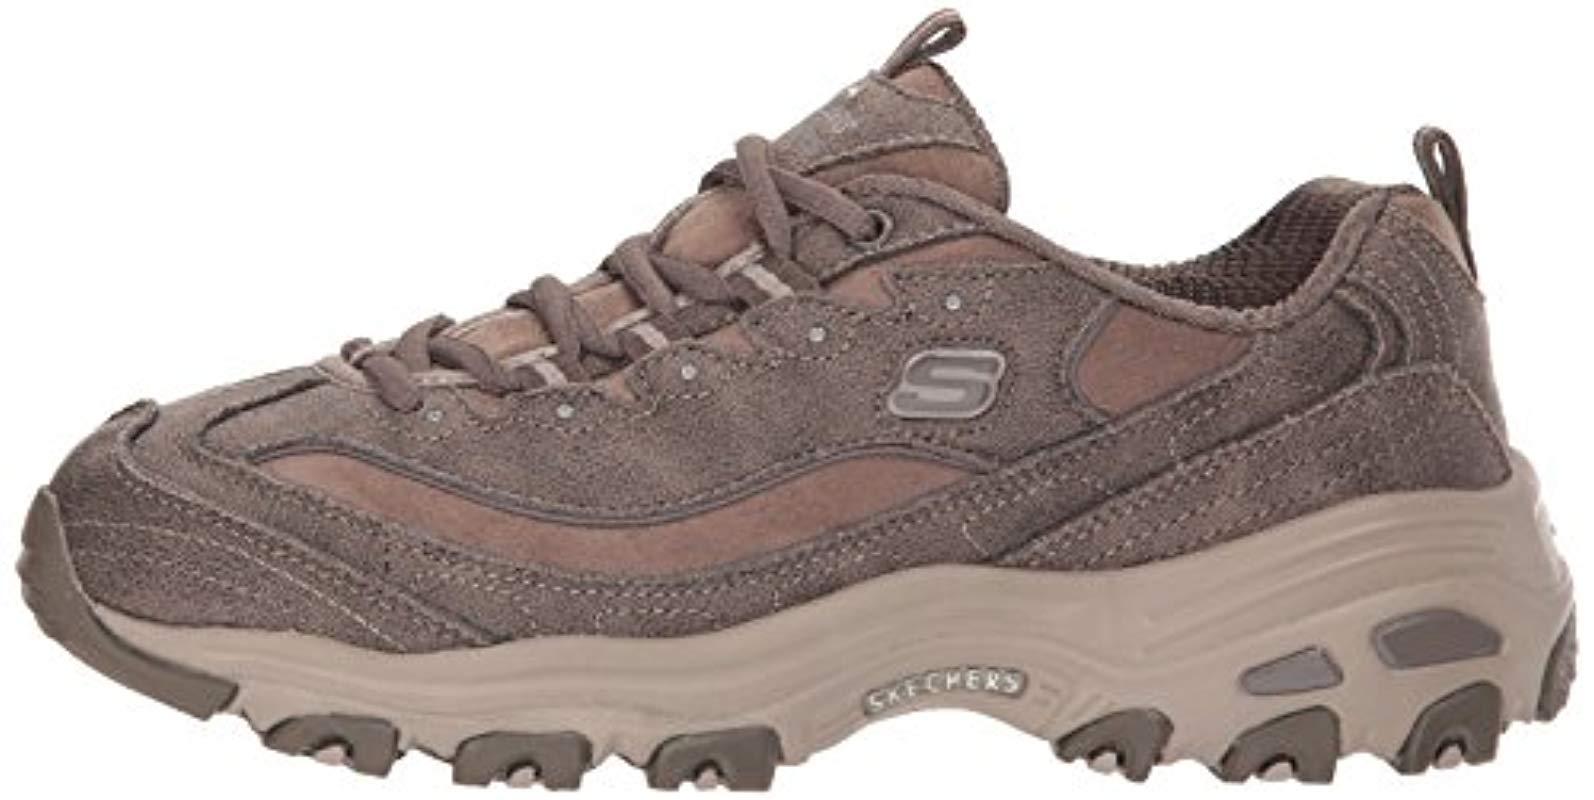 Skechers D'lites New S Trainers Taupe Uk in Brown Lyst UK